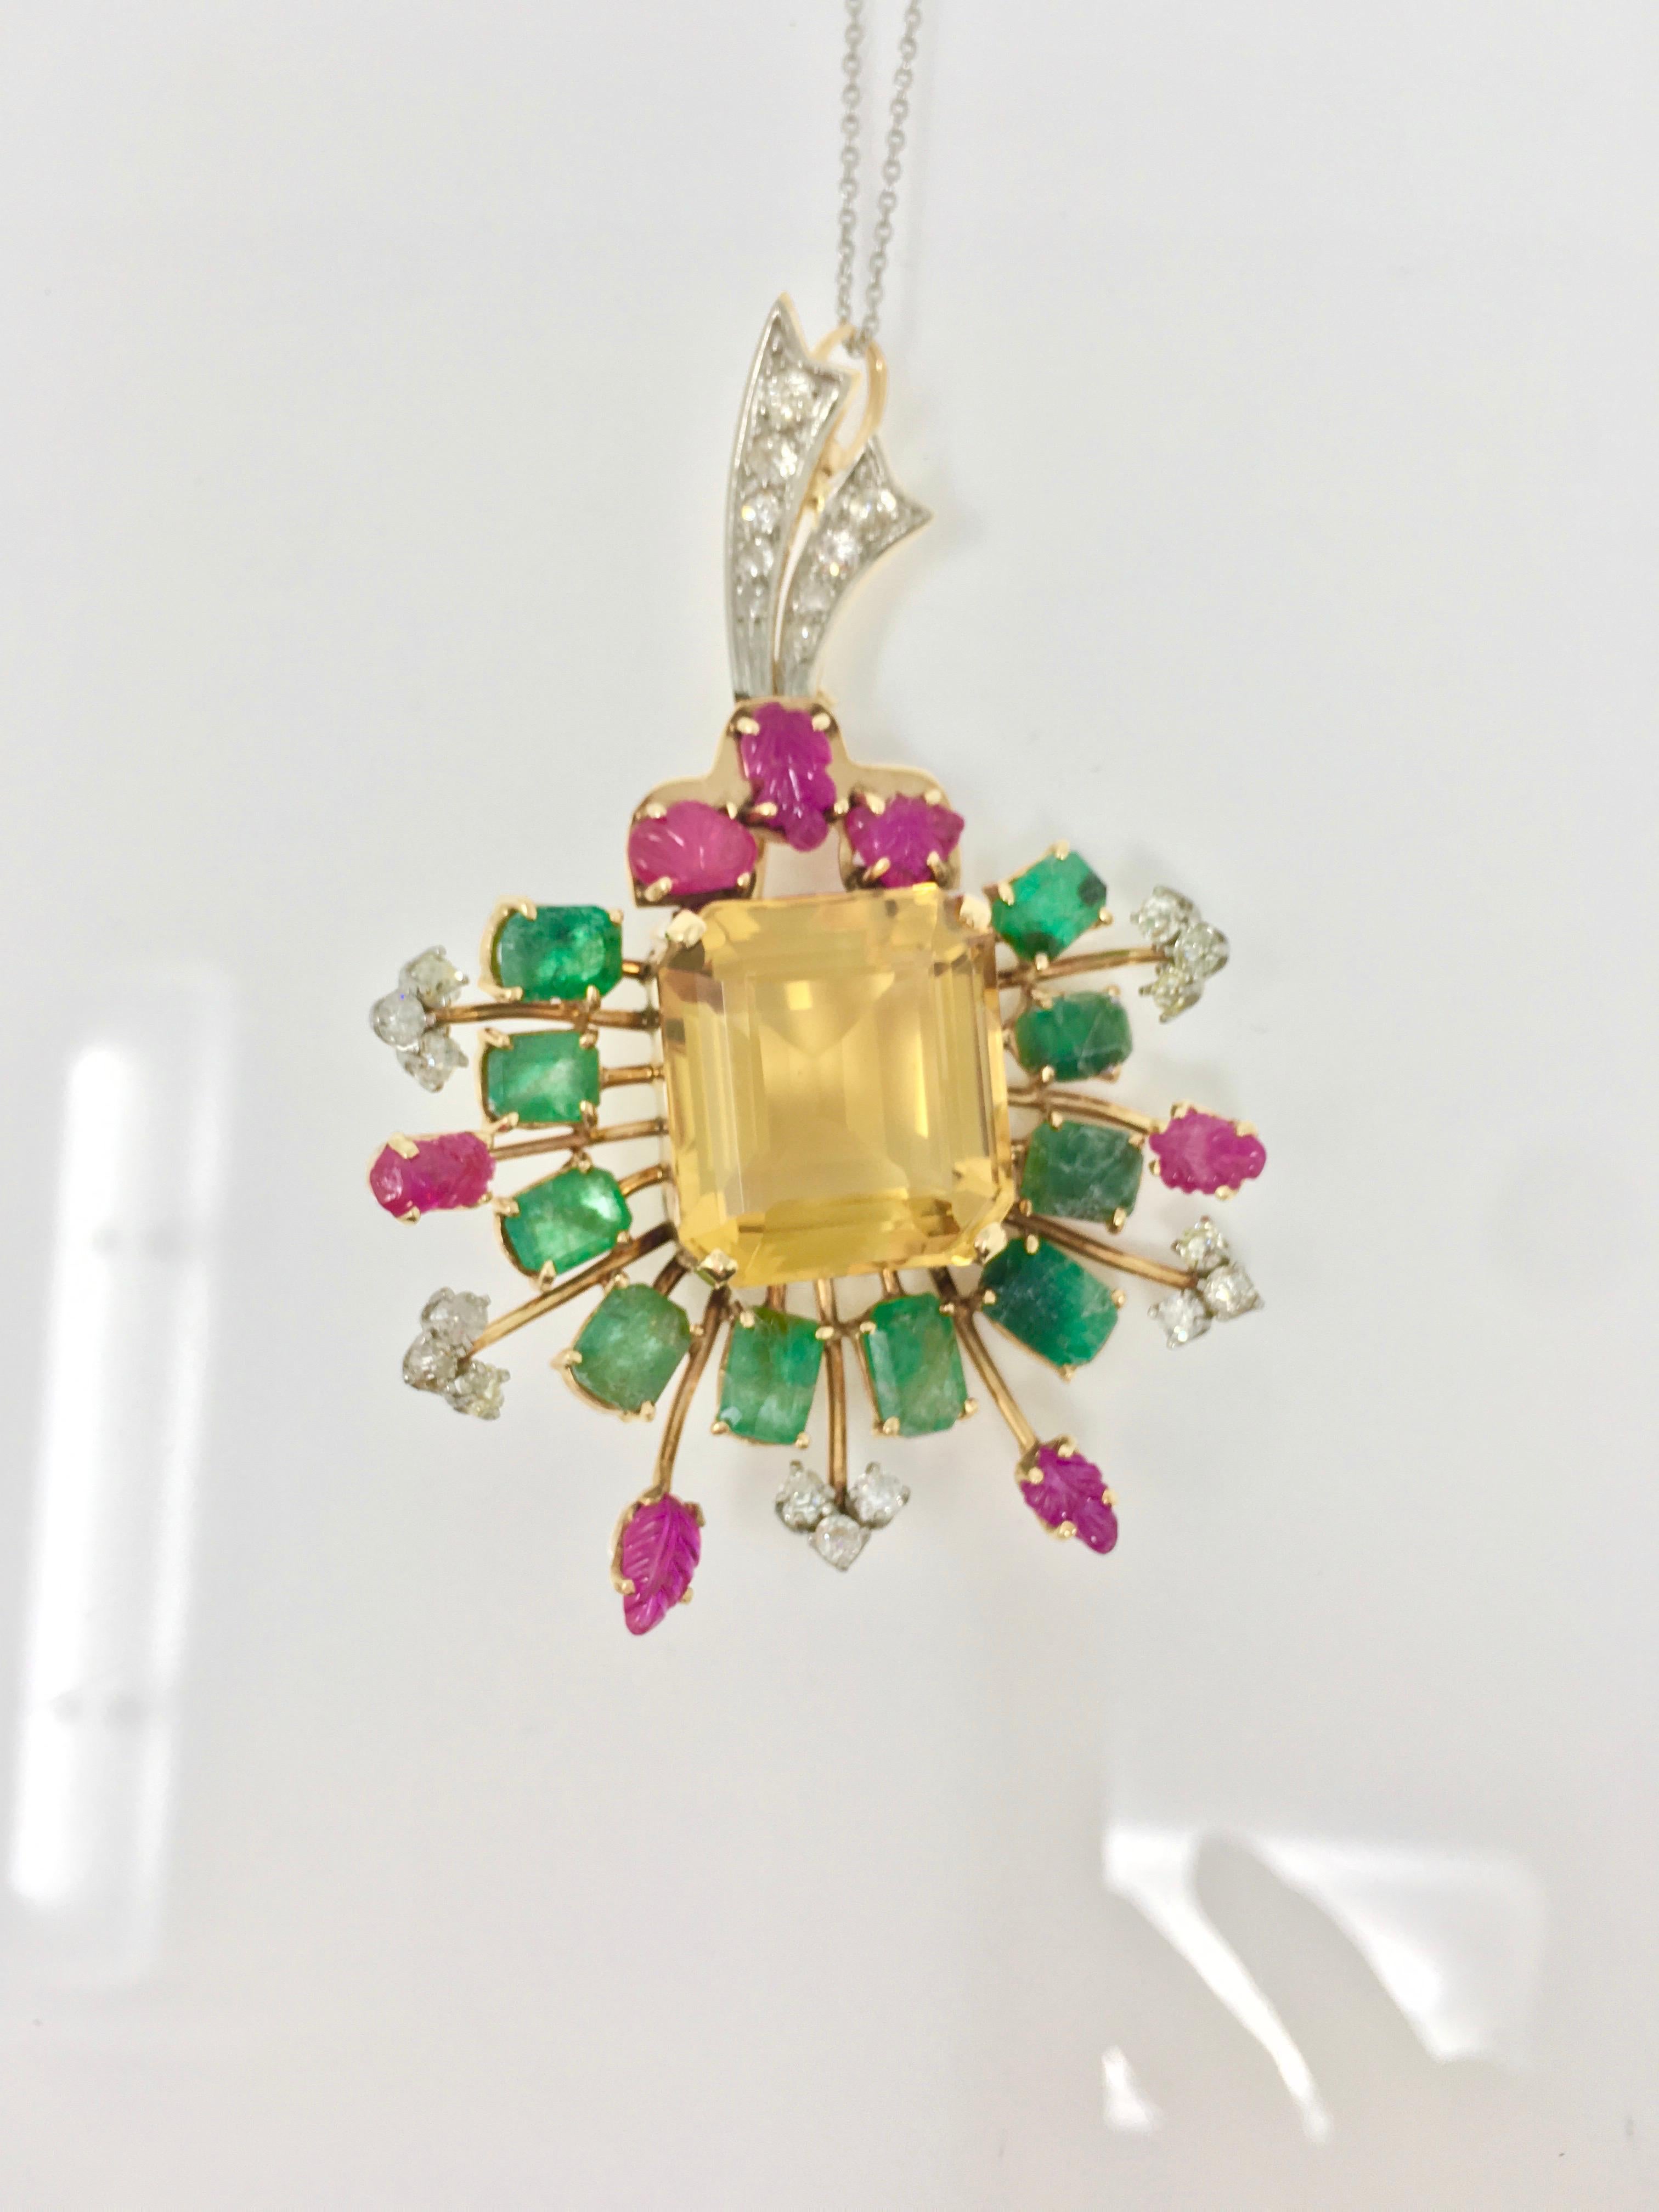 An attractive Ruby, Emerald , Citrine and White diamond broach/ pendant features a beautiful citrine weighing 25 carat approximately ,7 carved rubies weighing 3 carat approximately , 10 emeralds weighing 10 carat approximately and 25 small white